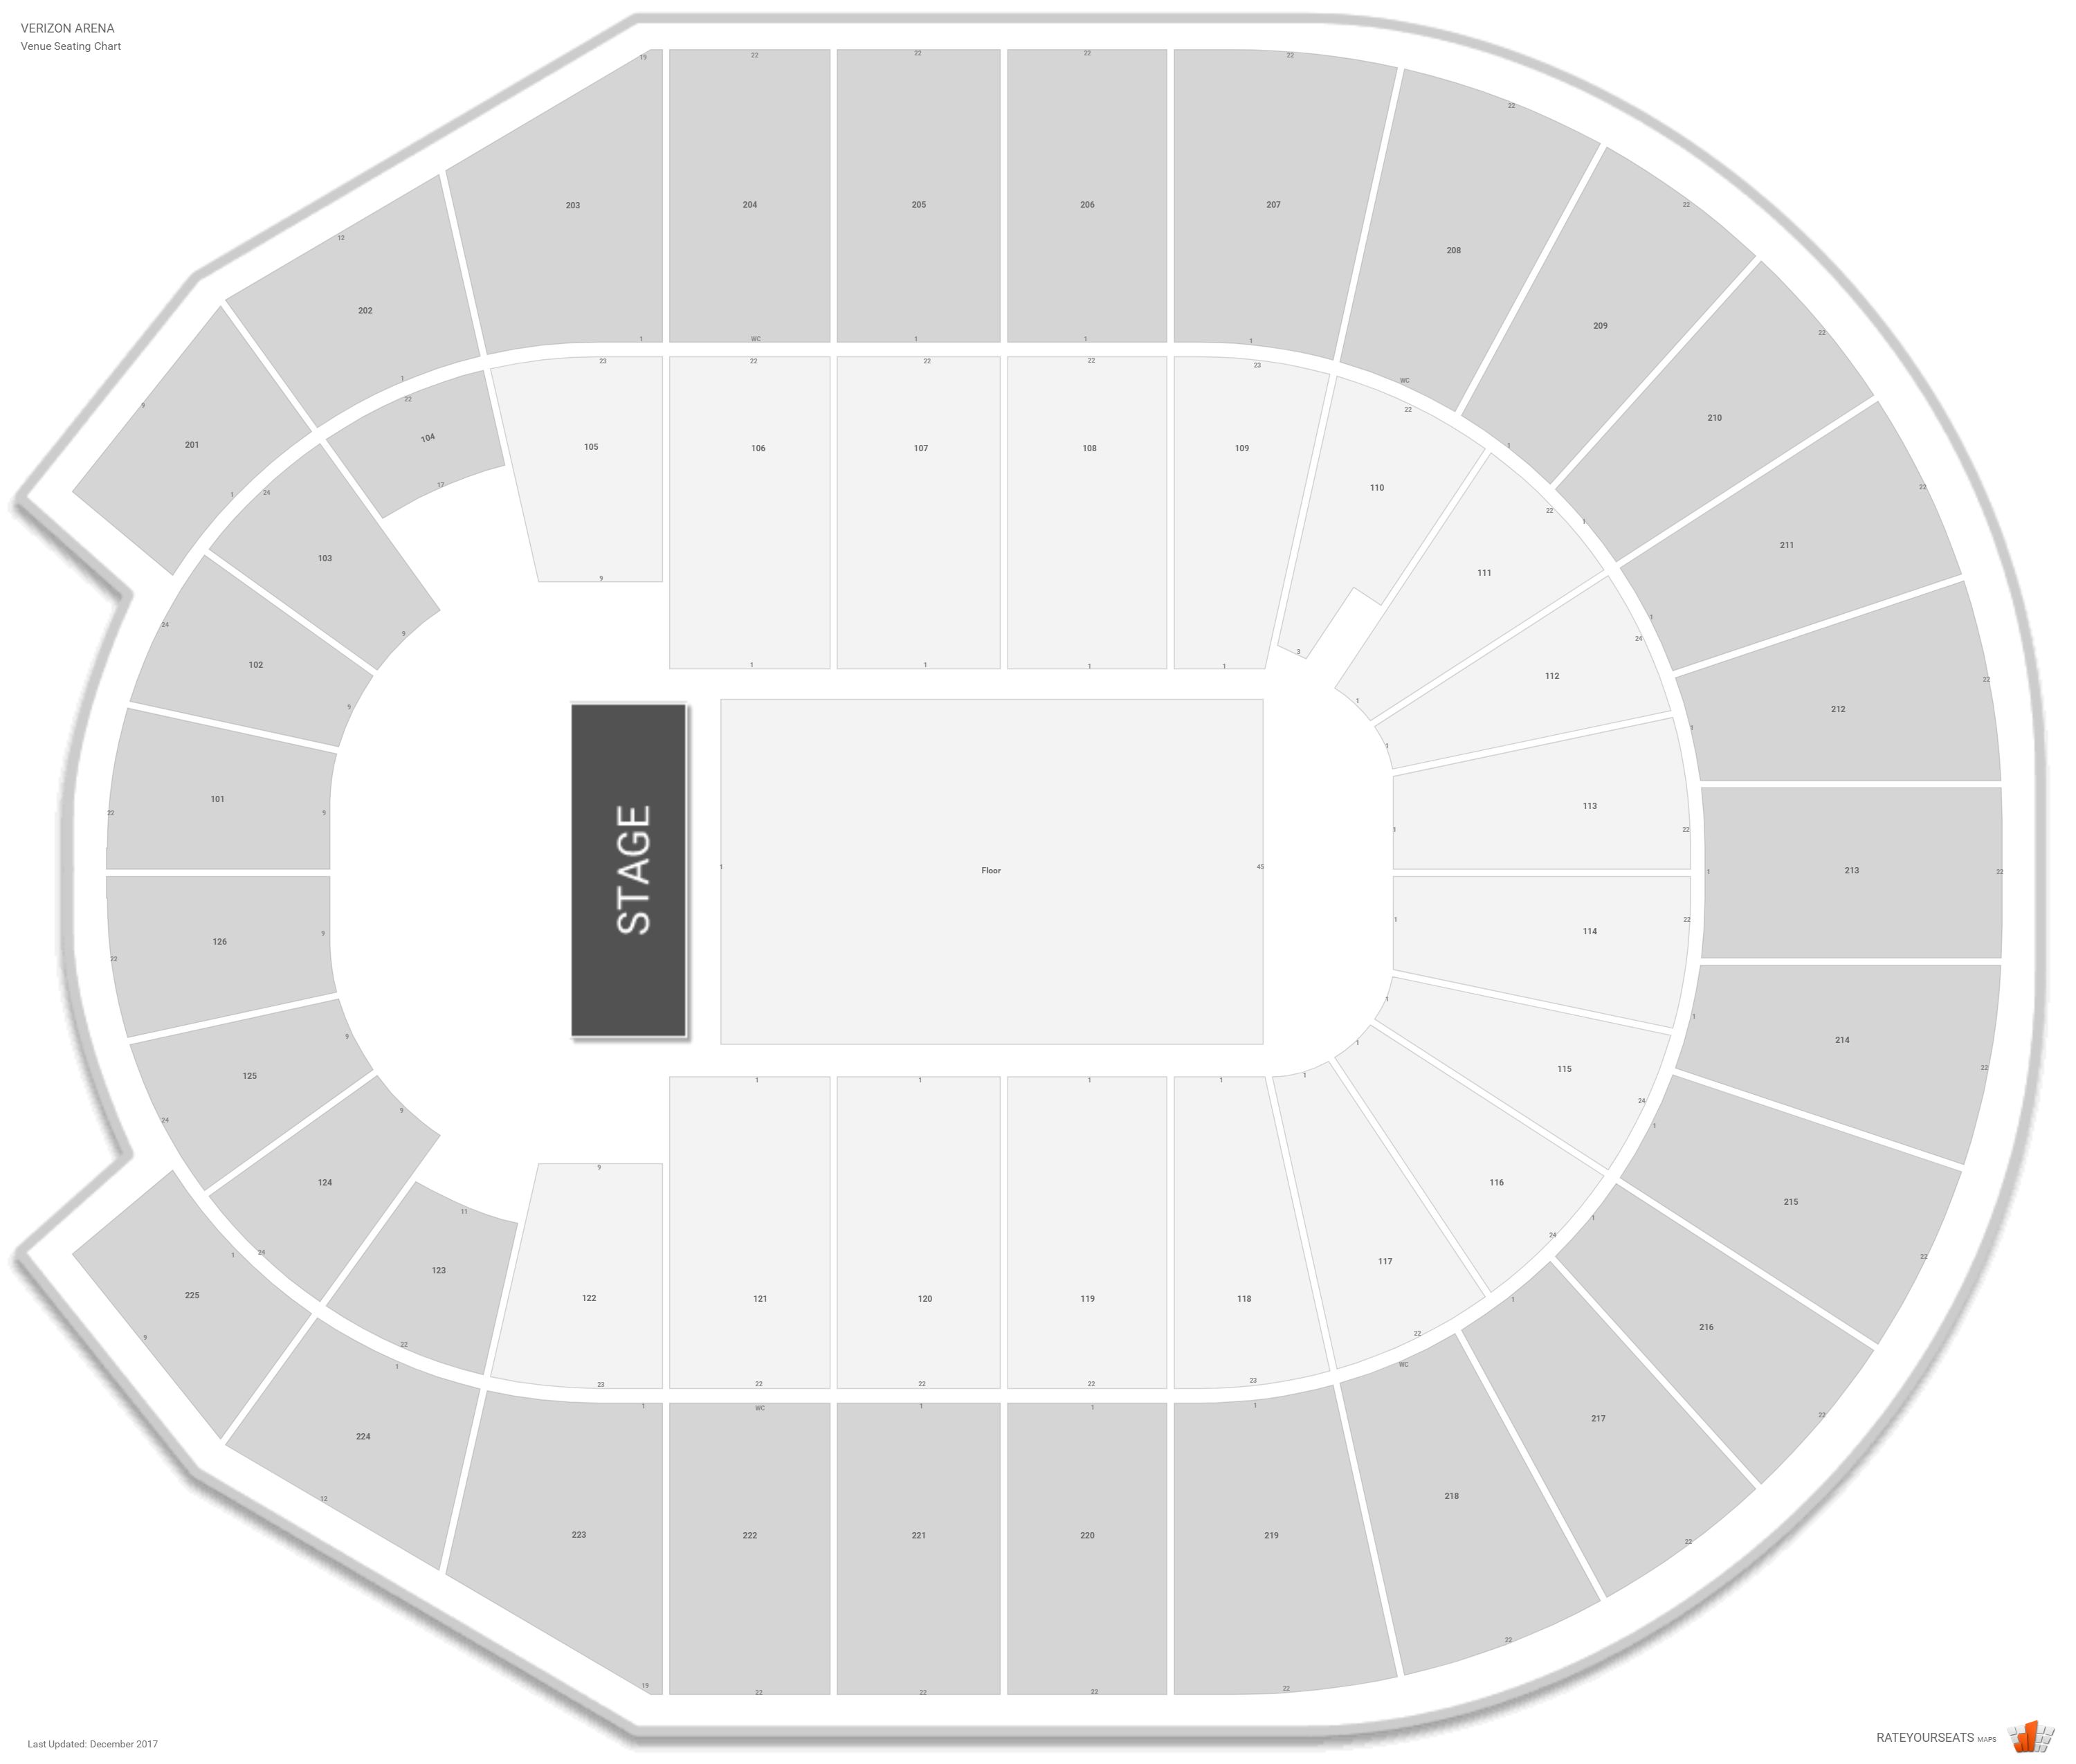 Verizon Center Concert Seating Chart With Seat Numbers